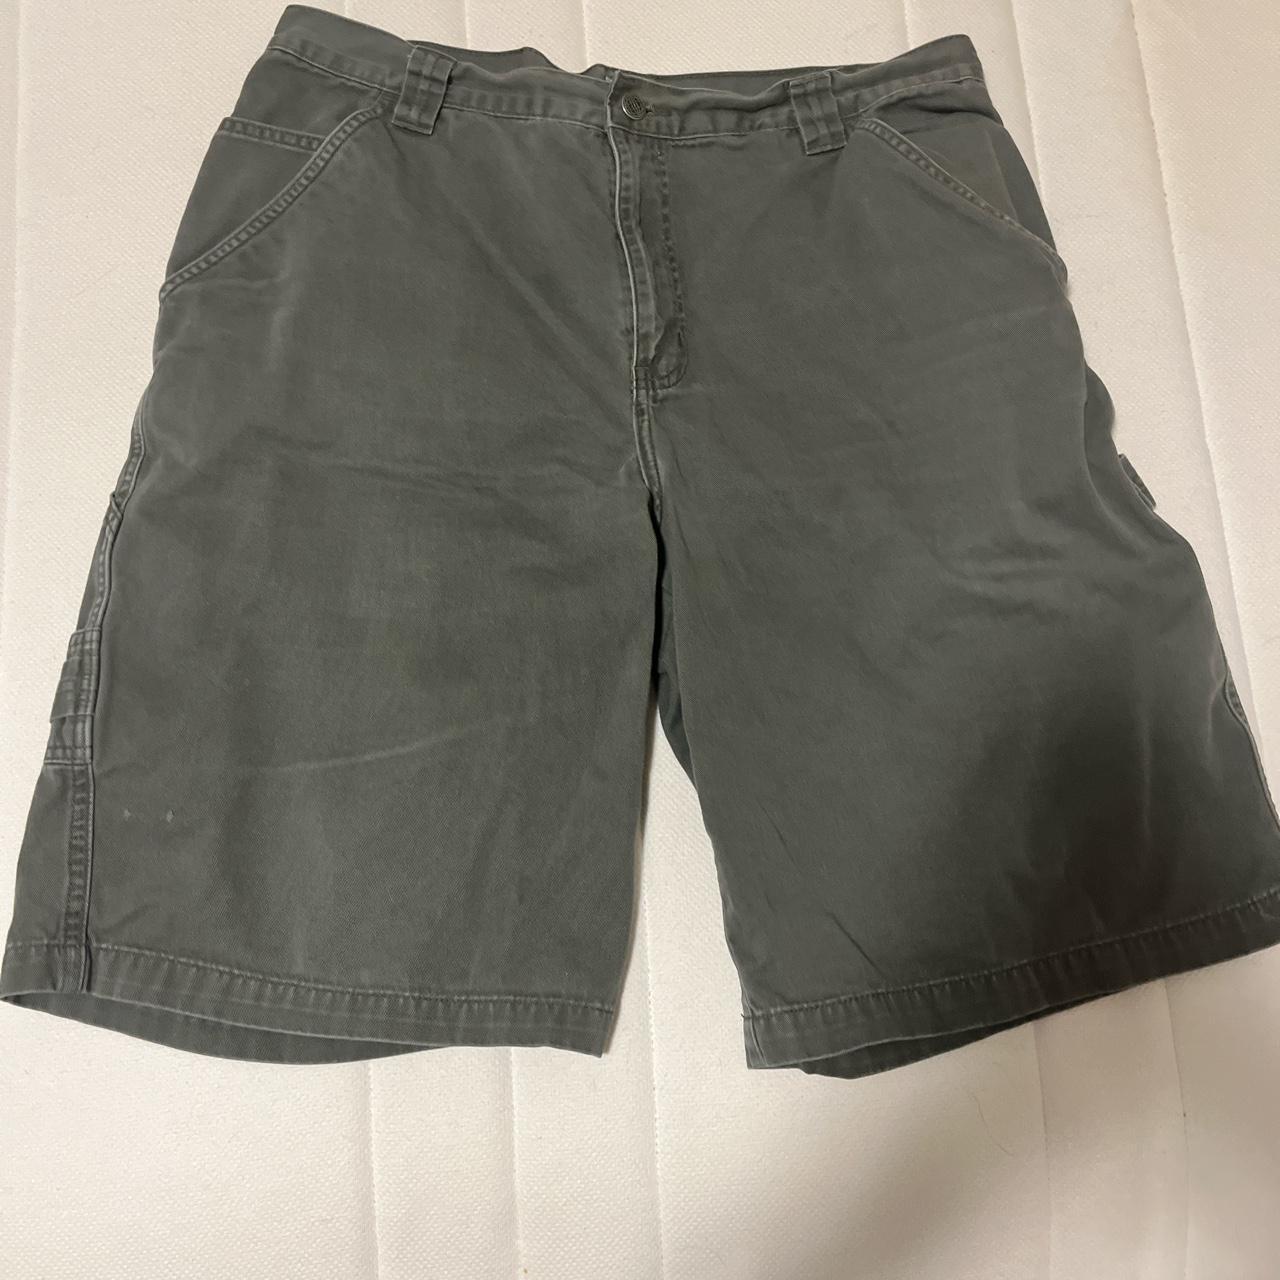 Utility Men's Green and Brown Shorts